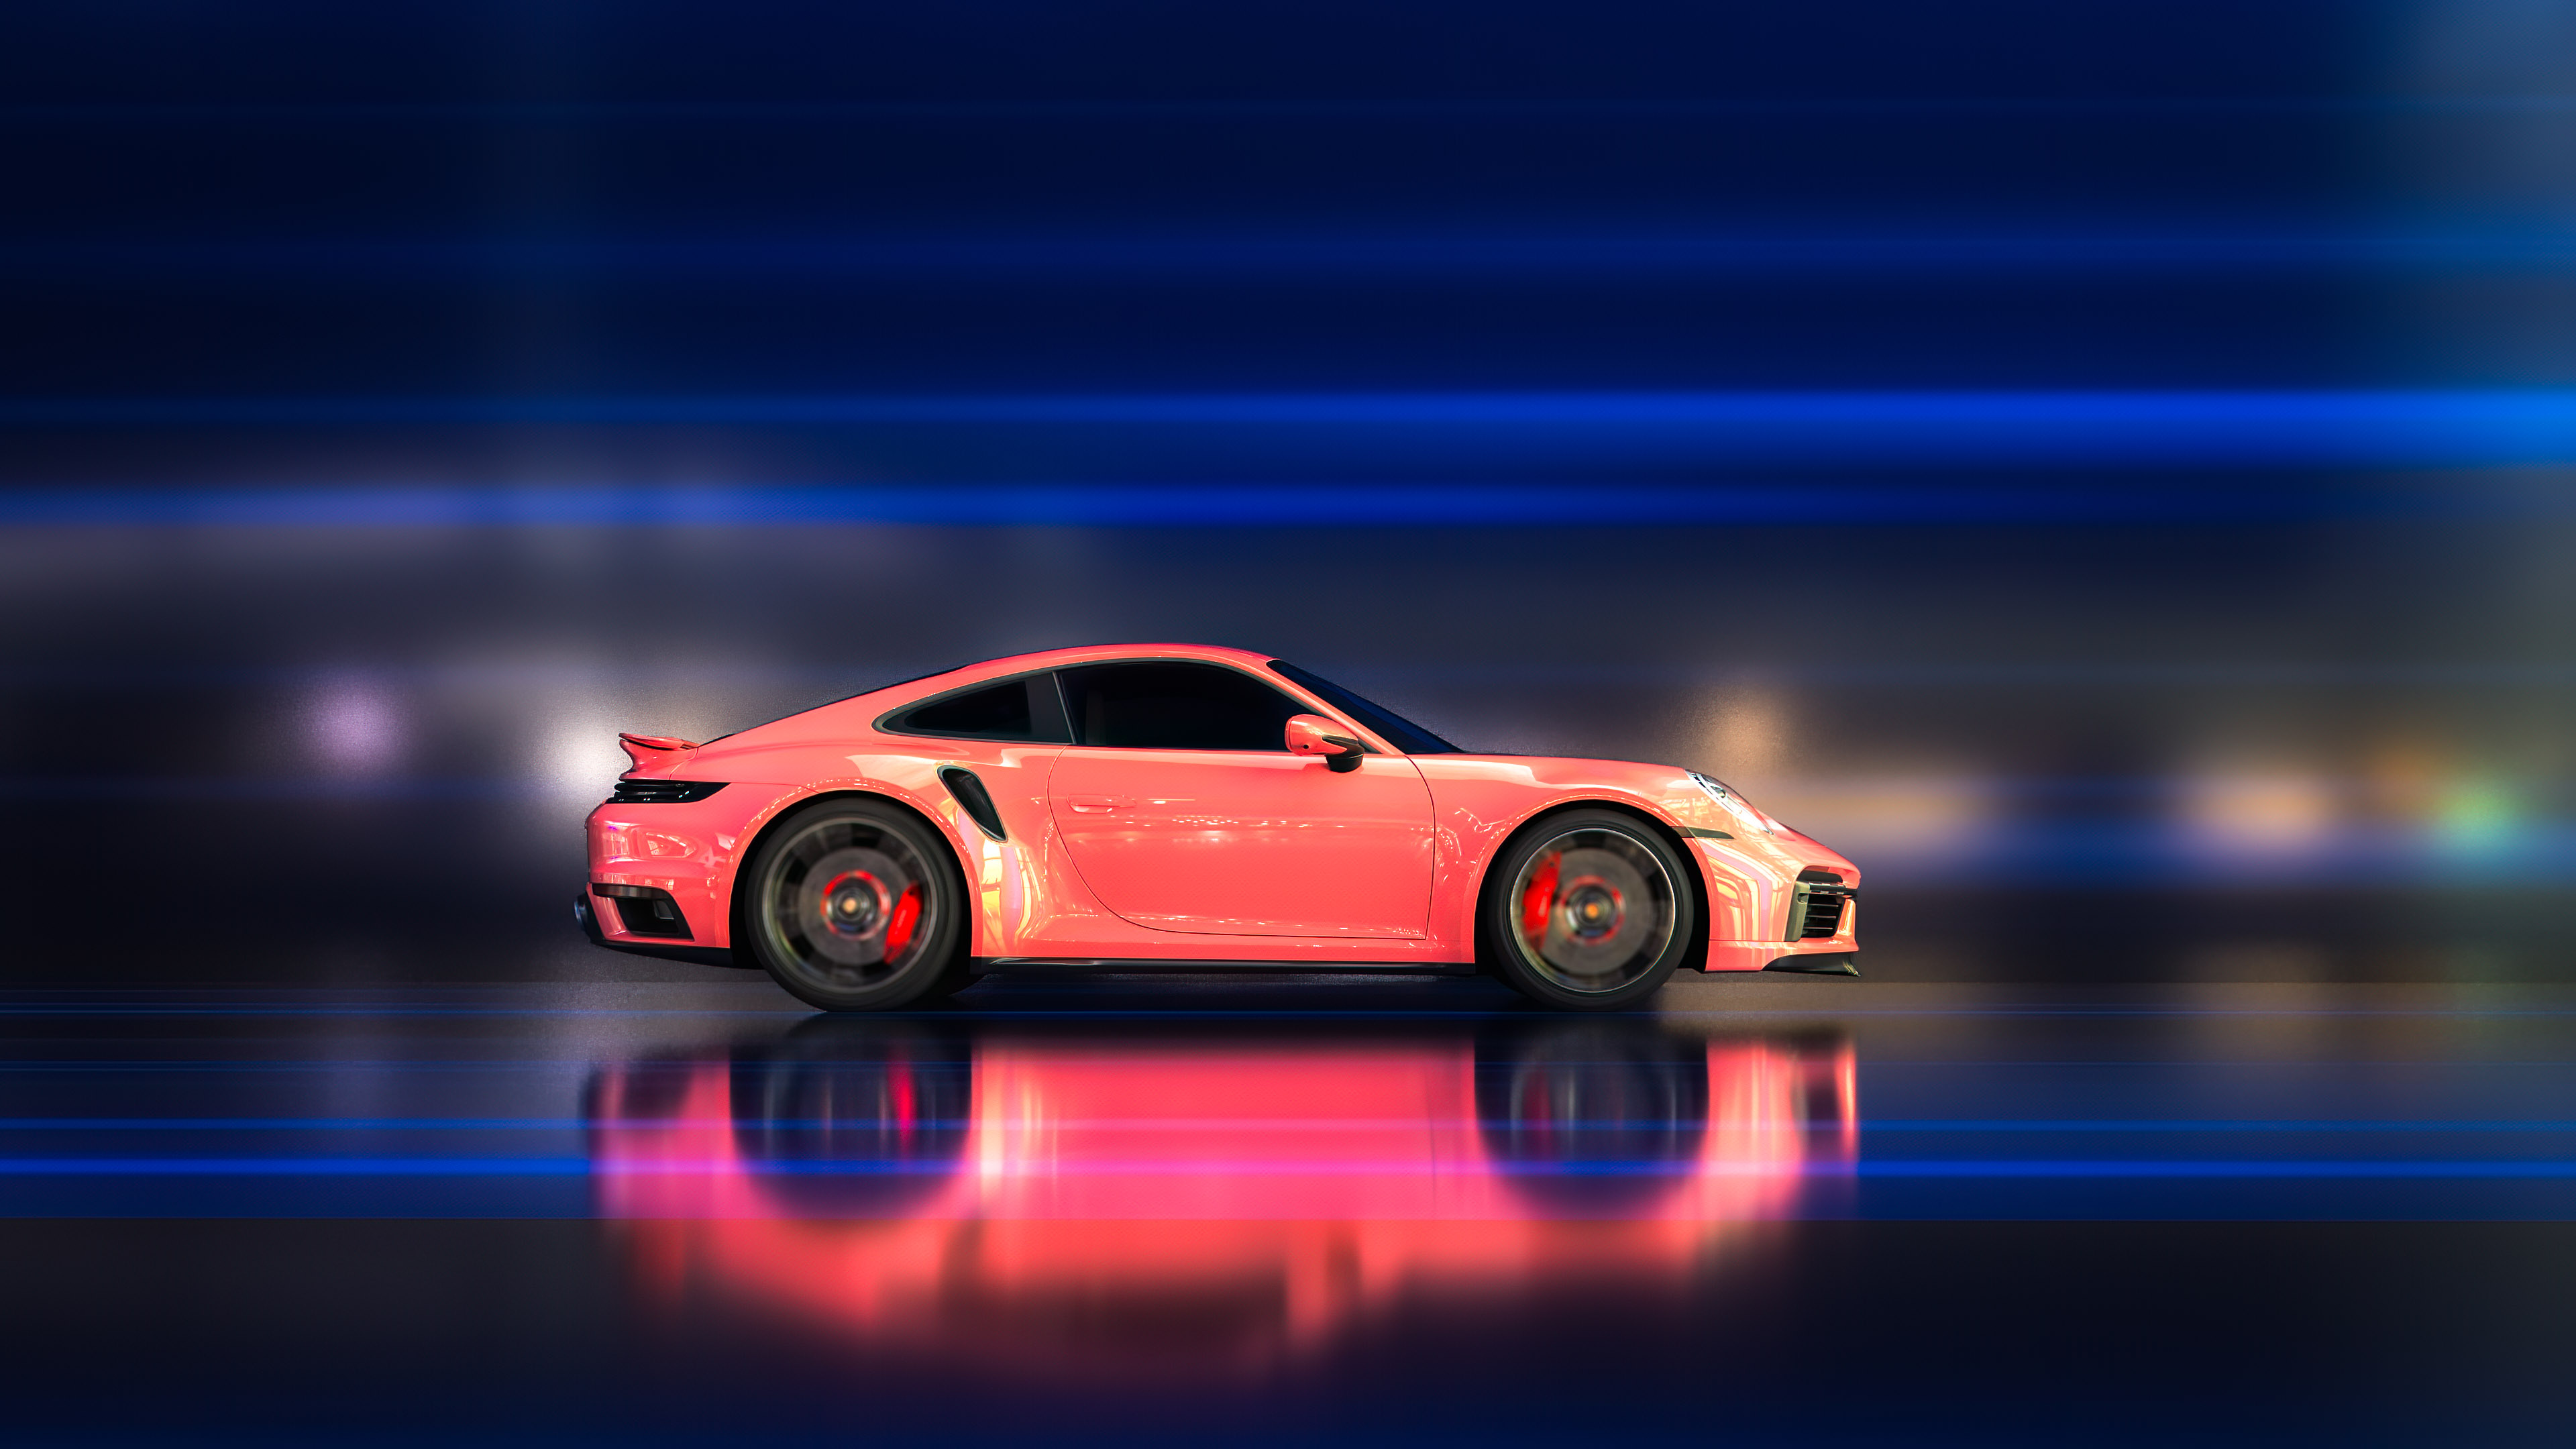 Revitalize your screens with the car wallpaper to download, presenting the Porsche 911 sports car, and effortlessly enhancing the aesthetic appeal of your digital surroundings.